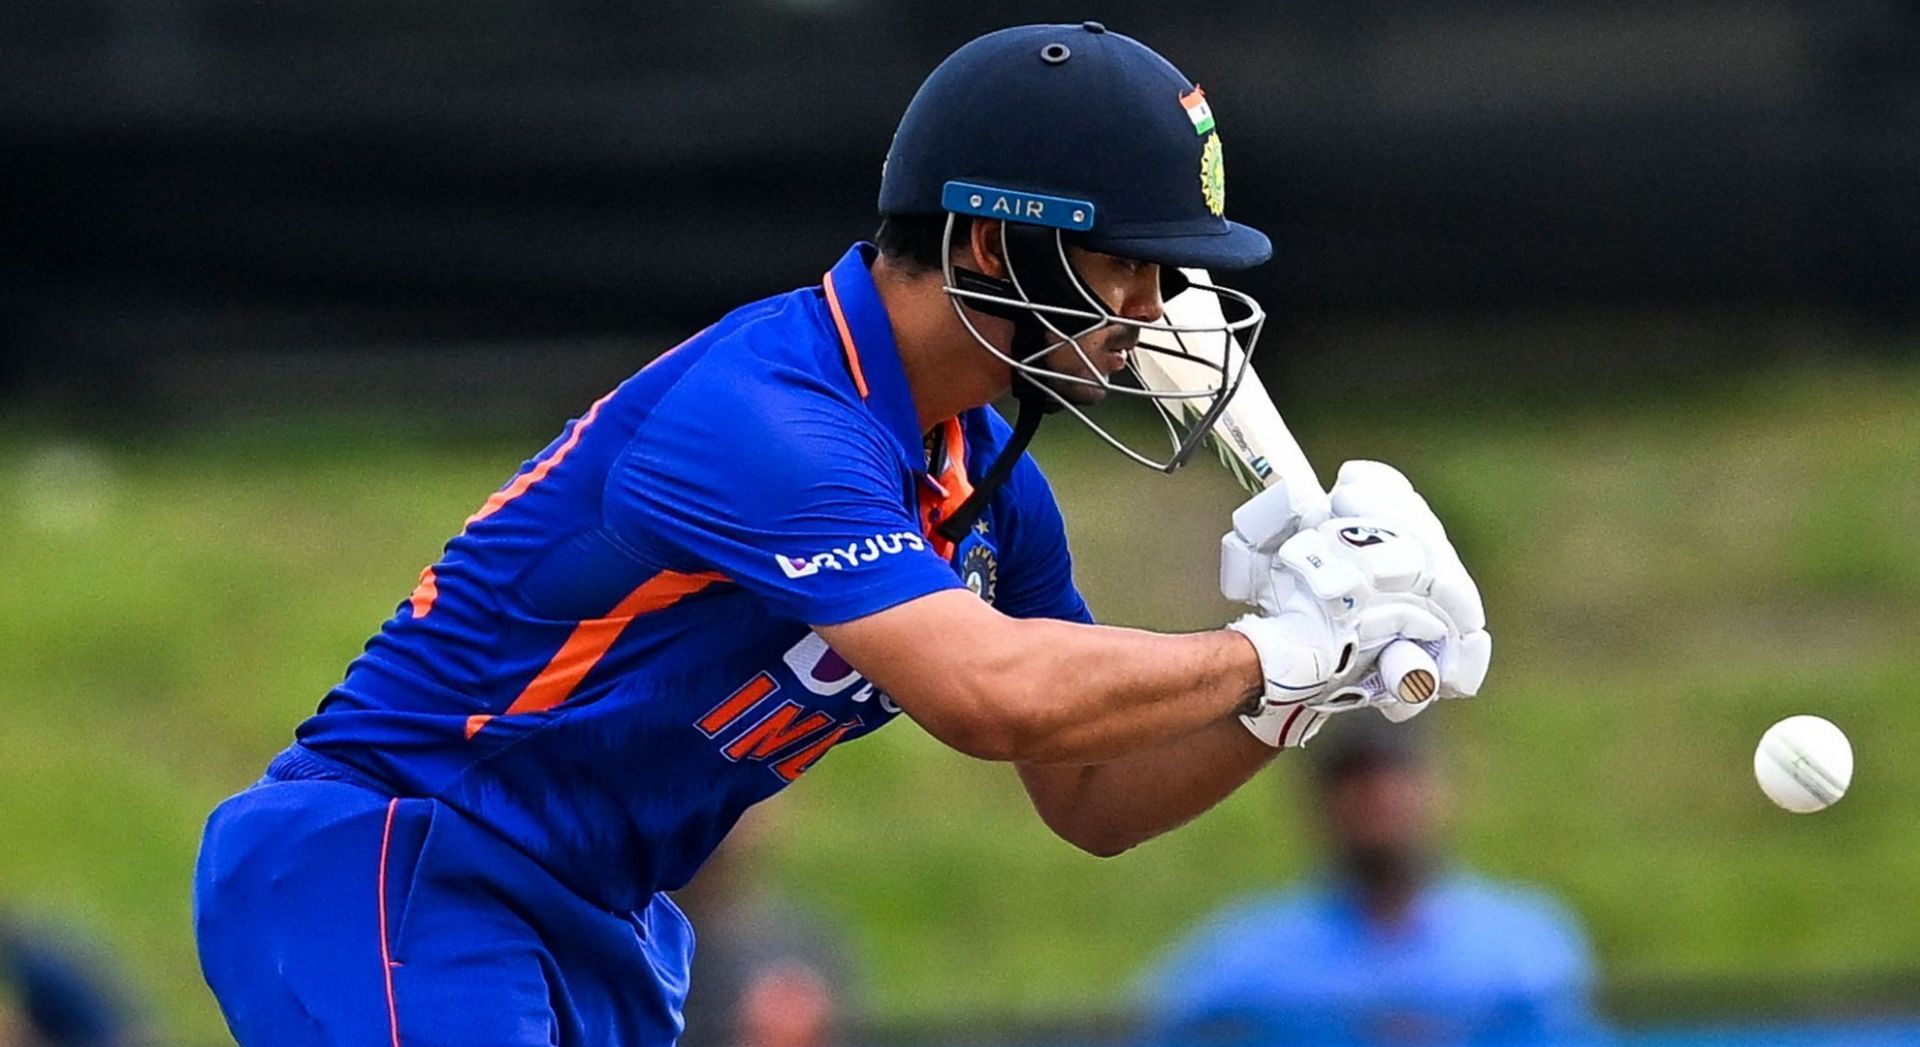 Ishan Kishan chooses to stay positive despite Asia Cup omission. [Pic credits: ICC]